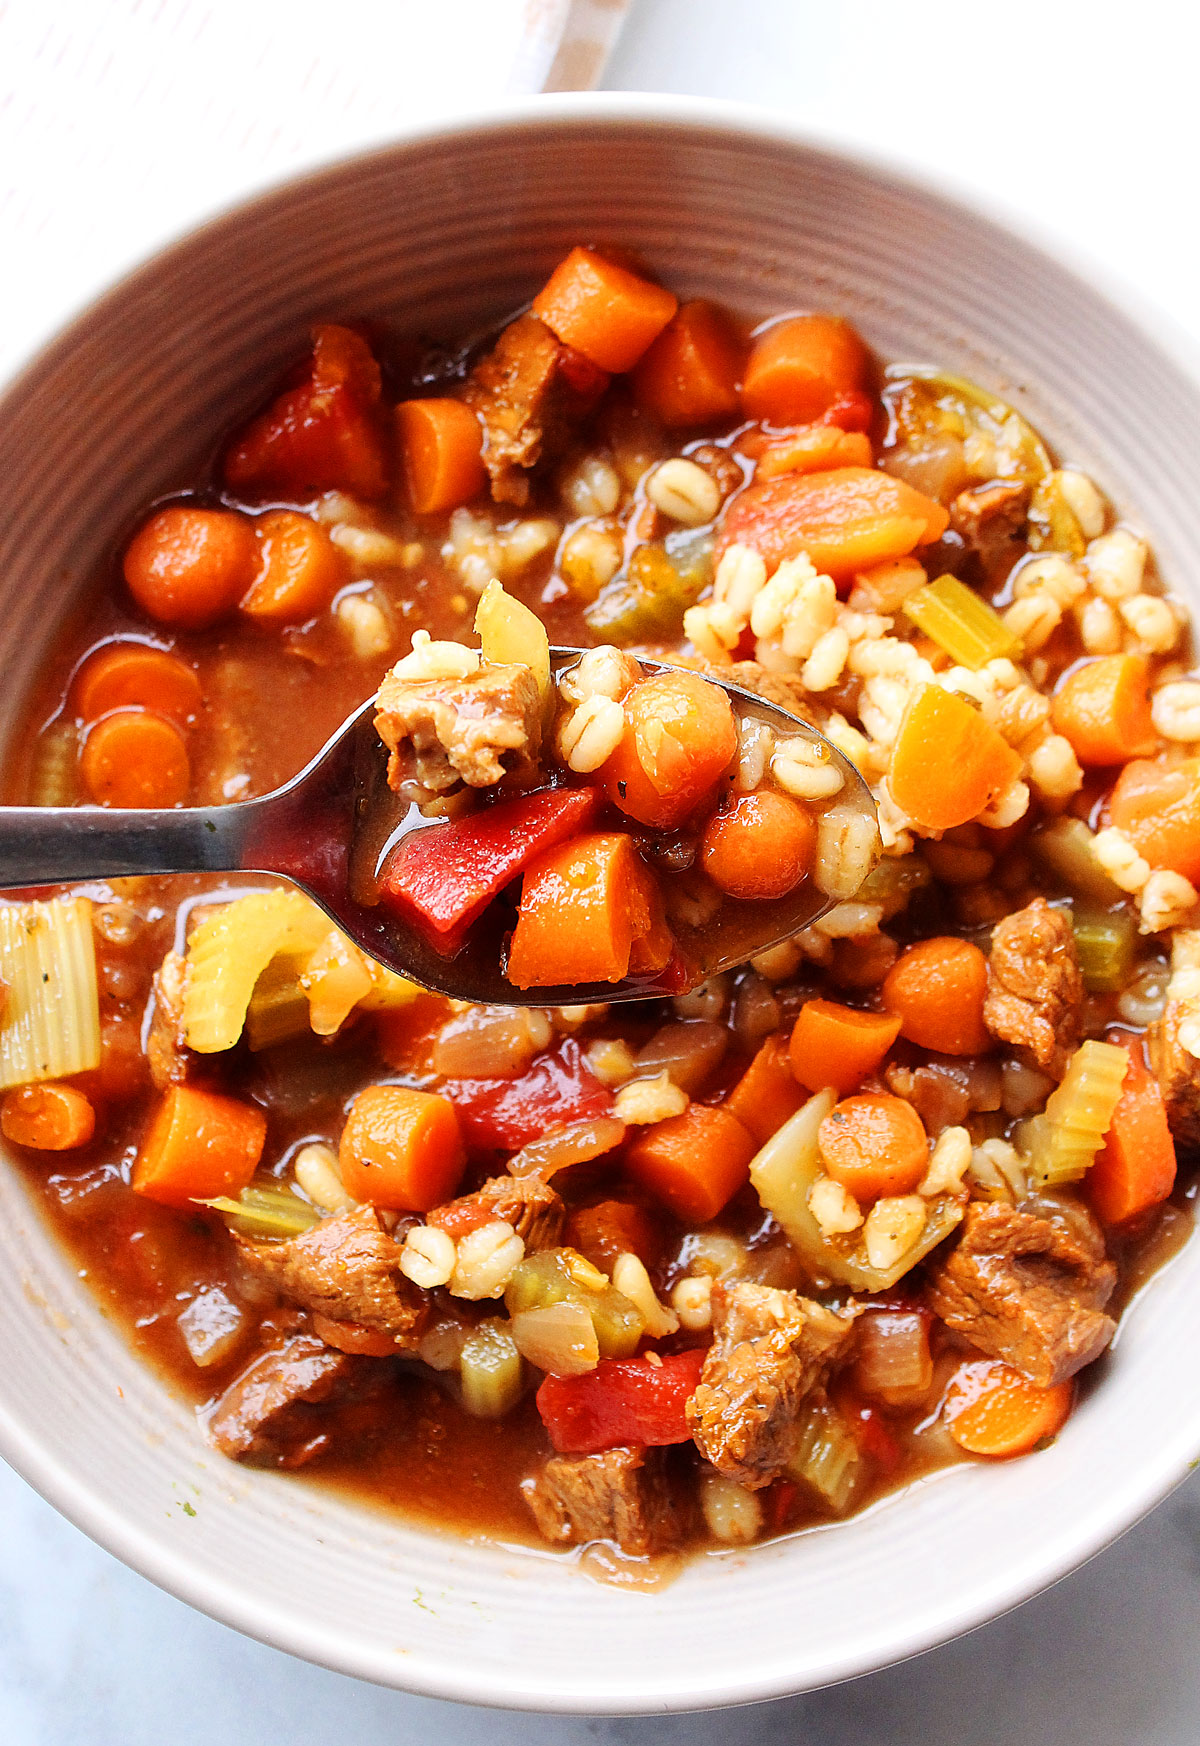 Slow Cooker Beef Barley Soup is a delicious soup full of tasty beef chunks, bits of barley, and tons of vegetables. Life-in-the-Lofthouse.com